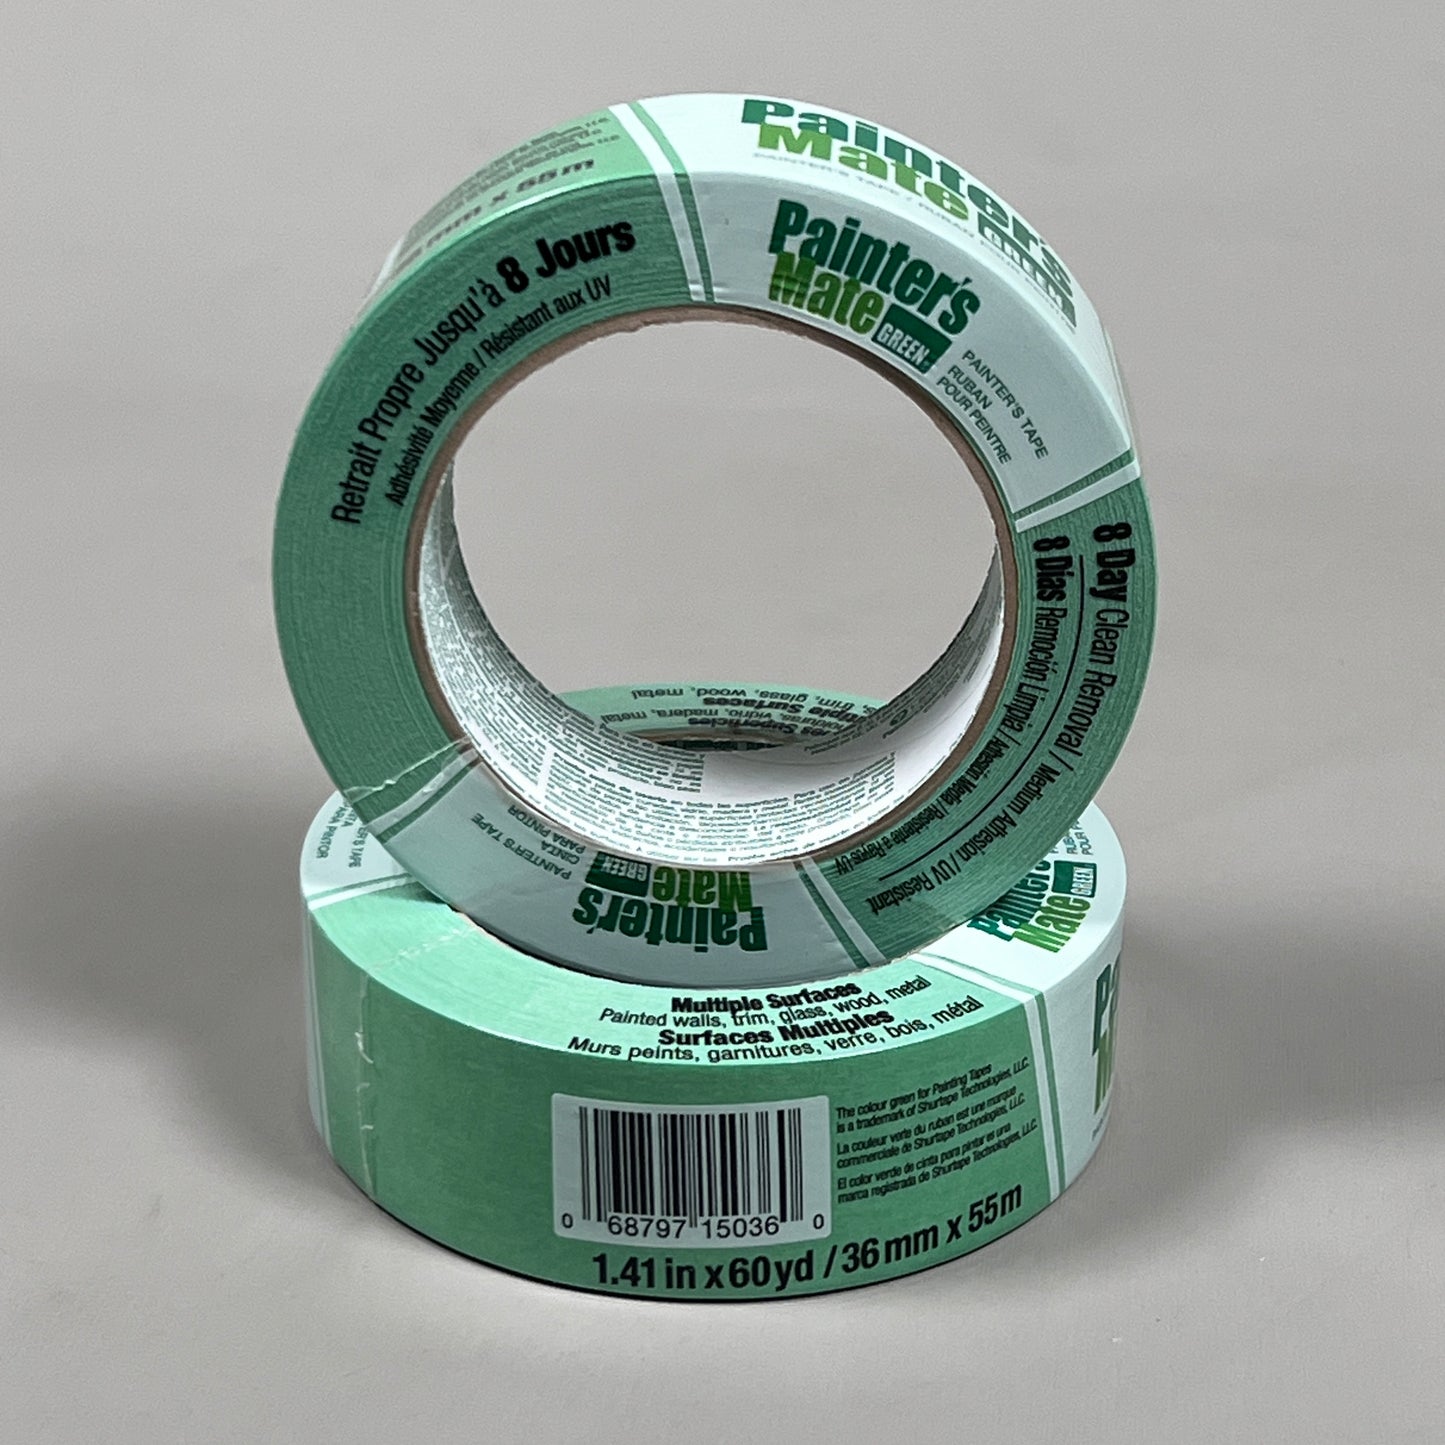 2-PK PAINTER'S MATE Multi-Surface Painter's Tape Green 1.41 IN x 60 YD 332261 (New)